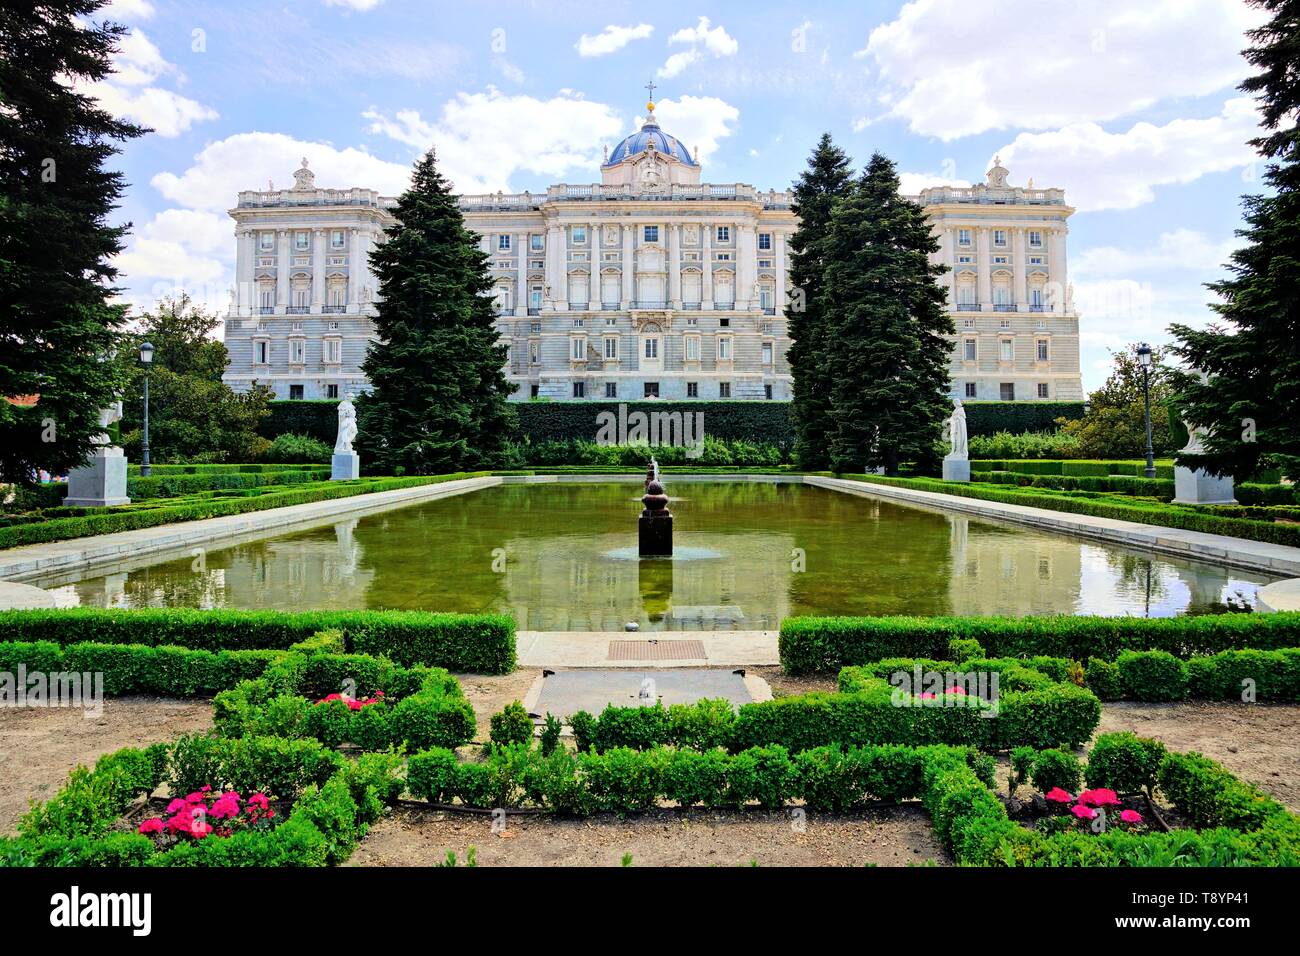 View of the Royal Palace of Madrid through the gardens, Spain Stock Photo